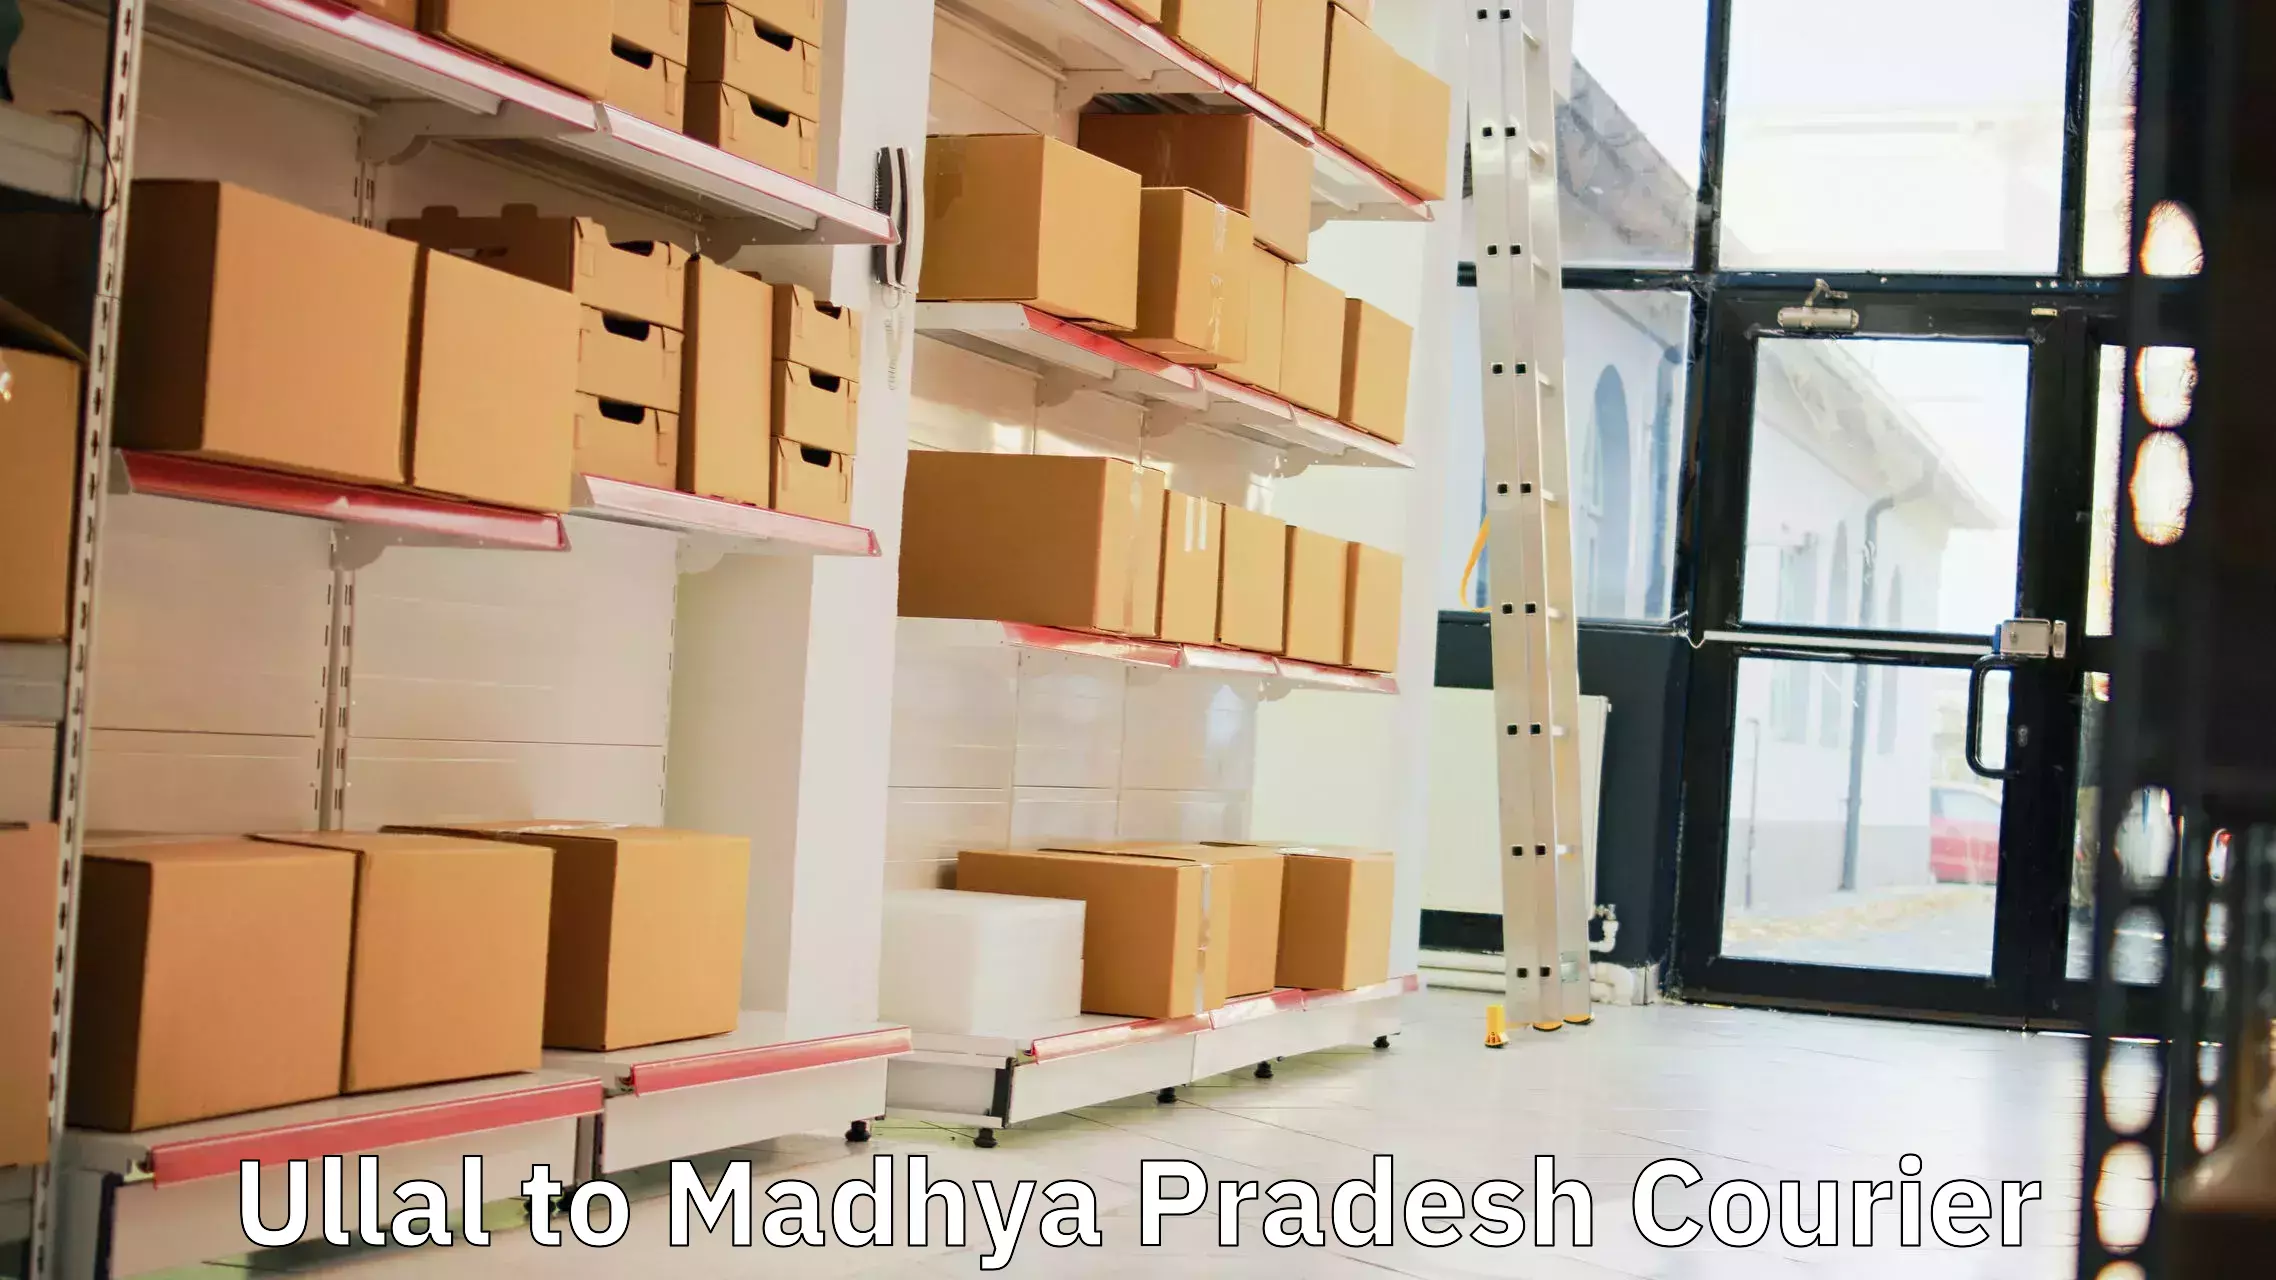 Cost-effective courier options Ullal to Hatta